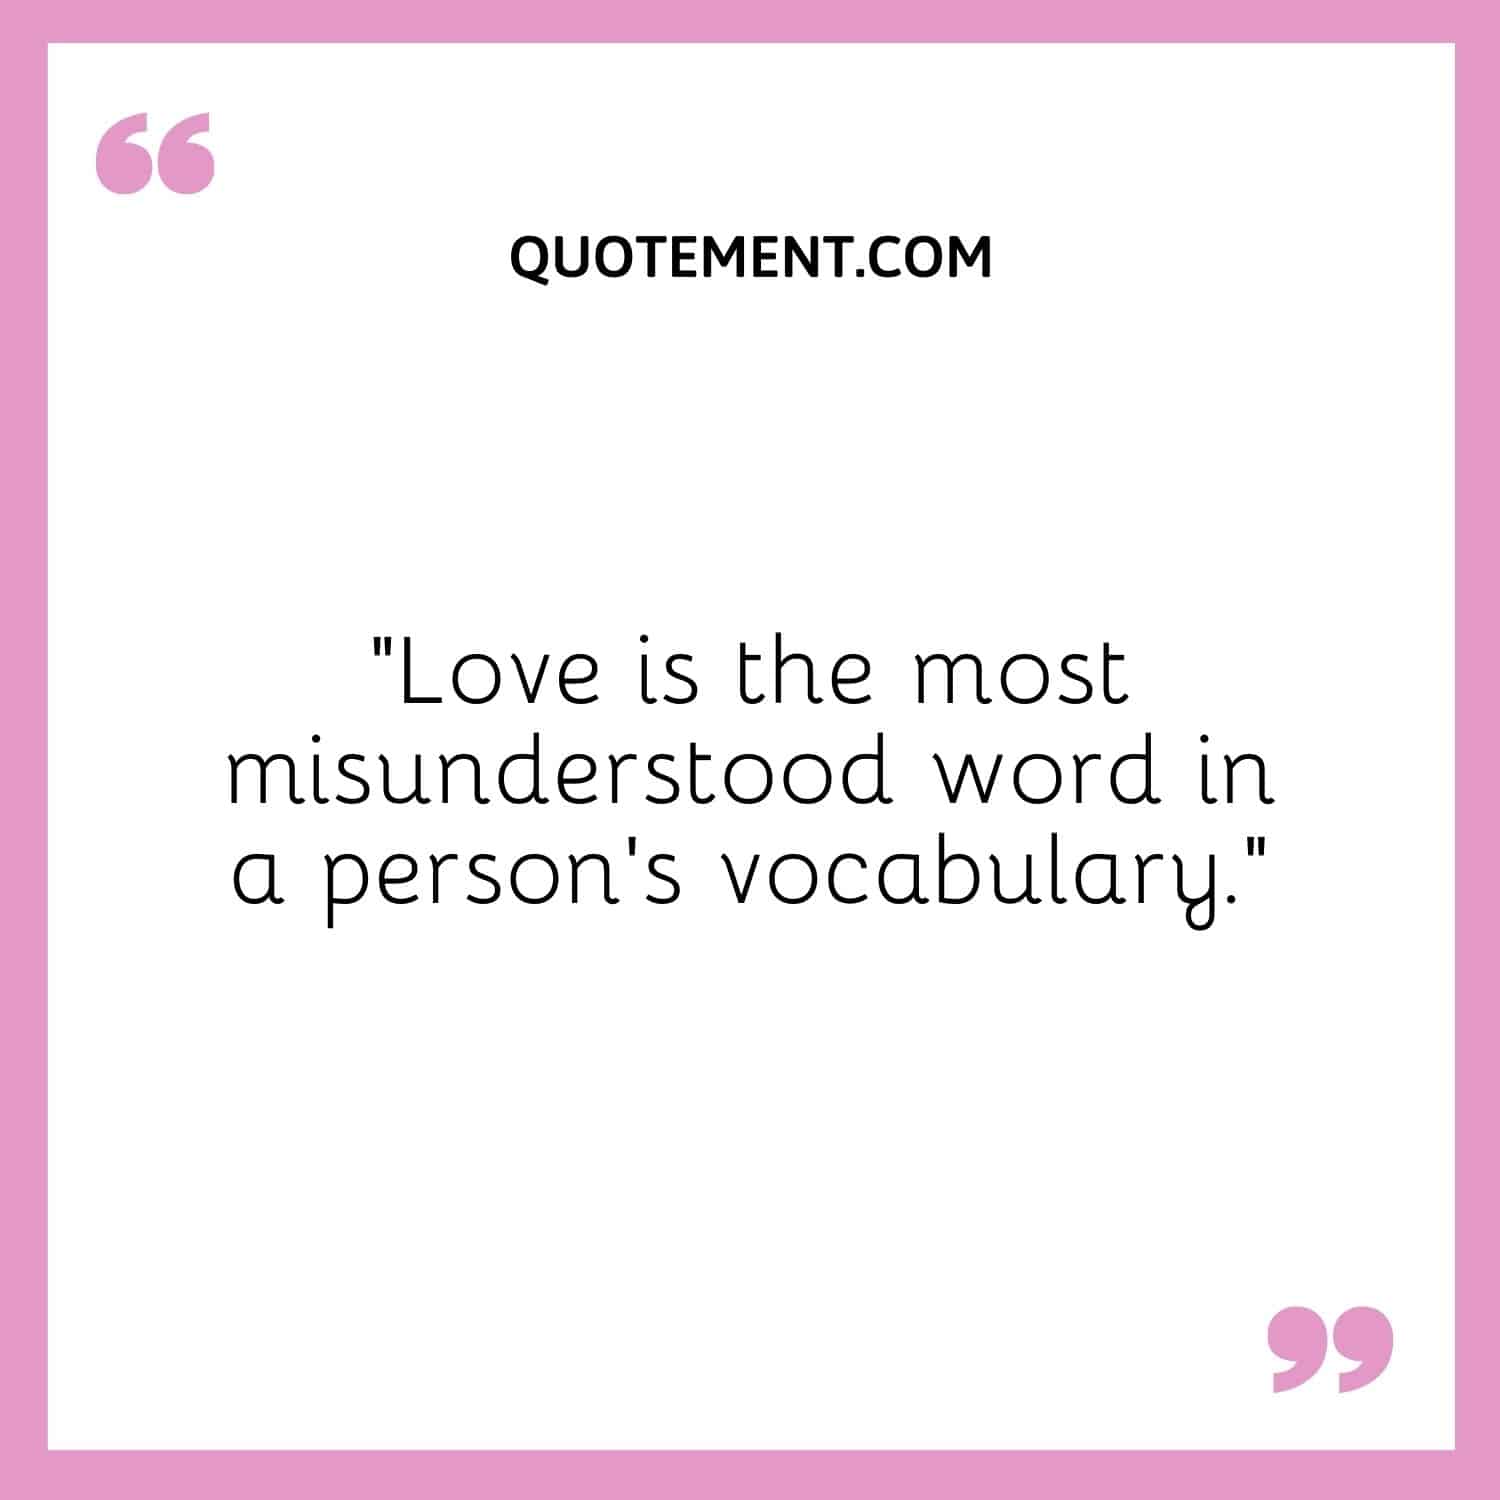 Love is the most misunderstood word in a person's vocabulary